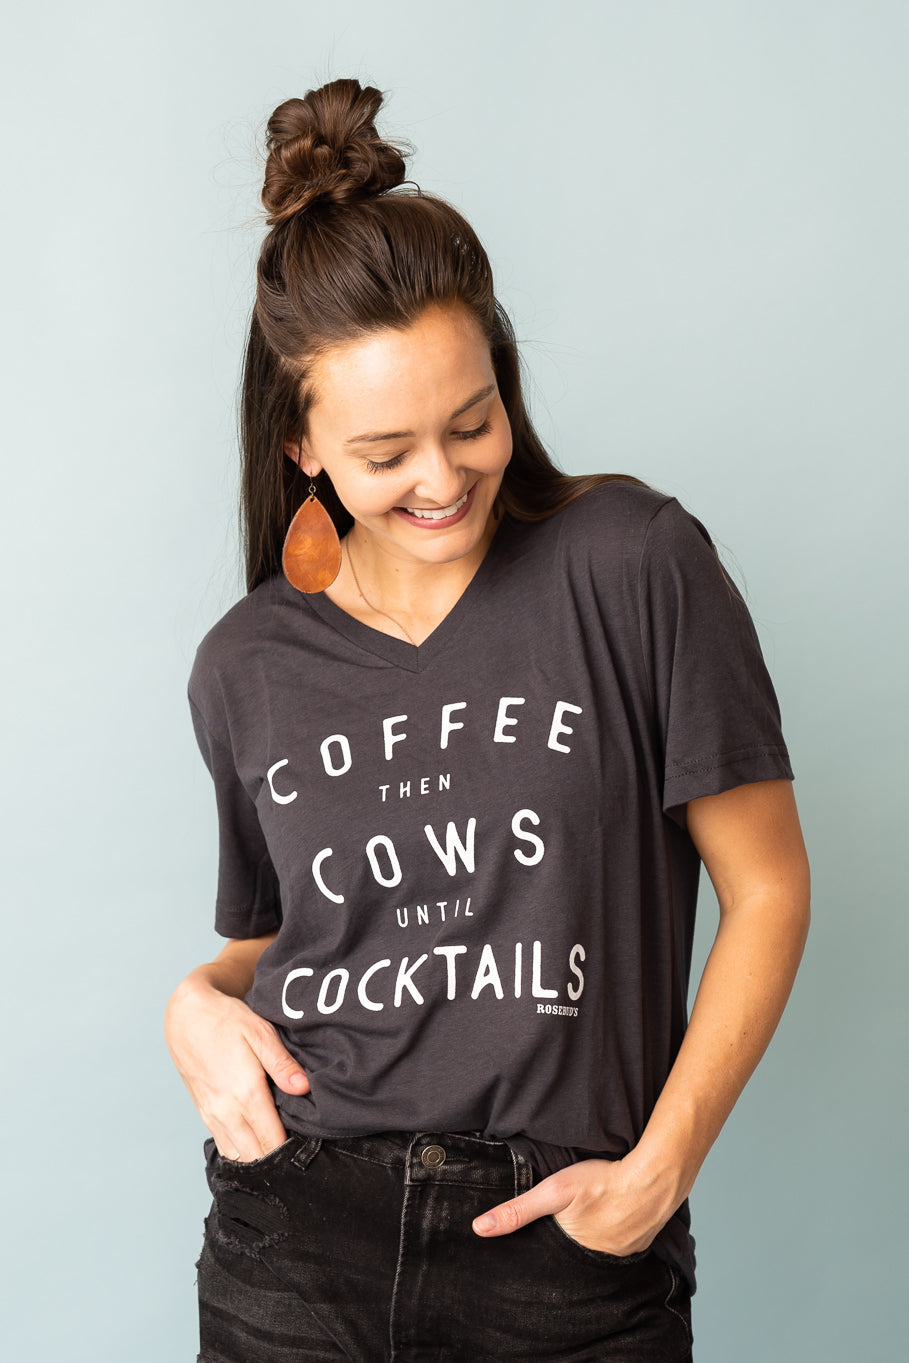 "Coffee then Cows until Cocktails" Graphic Tee - Rosebud's Tees